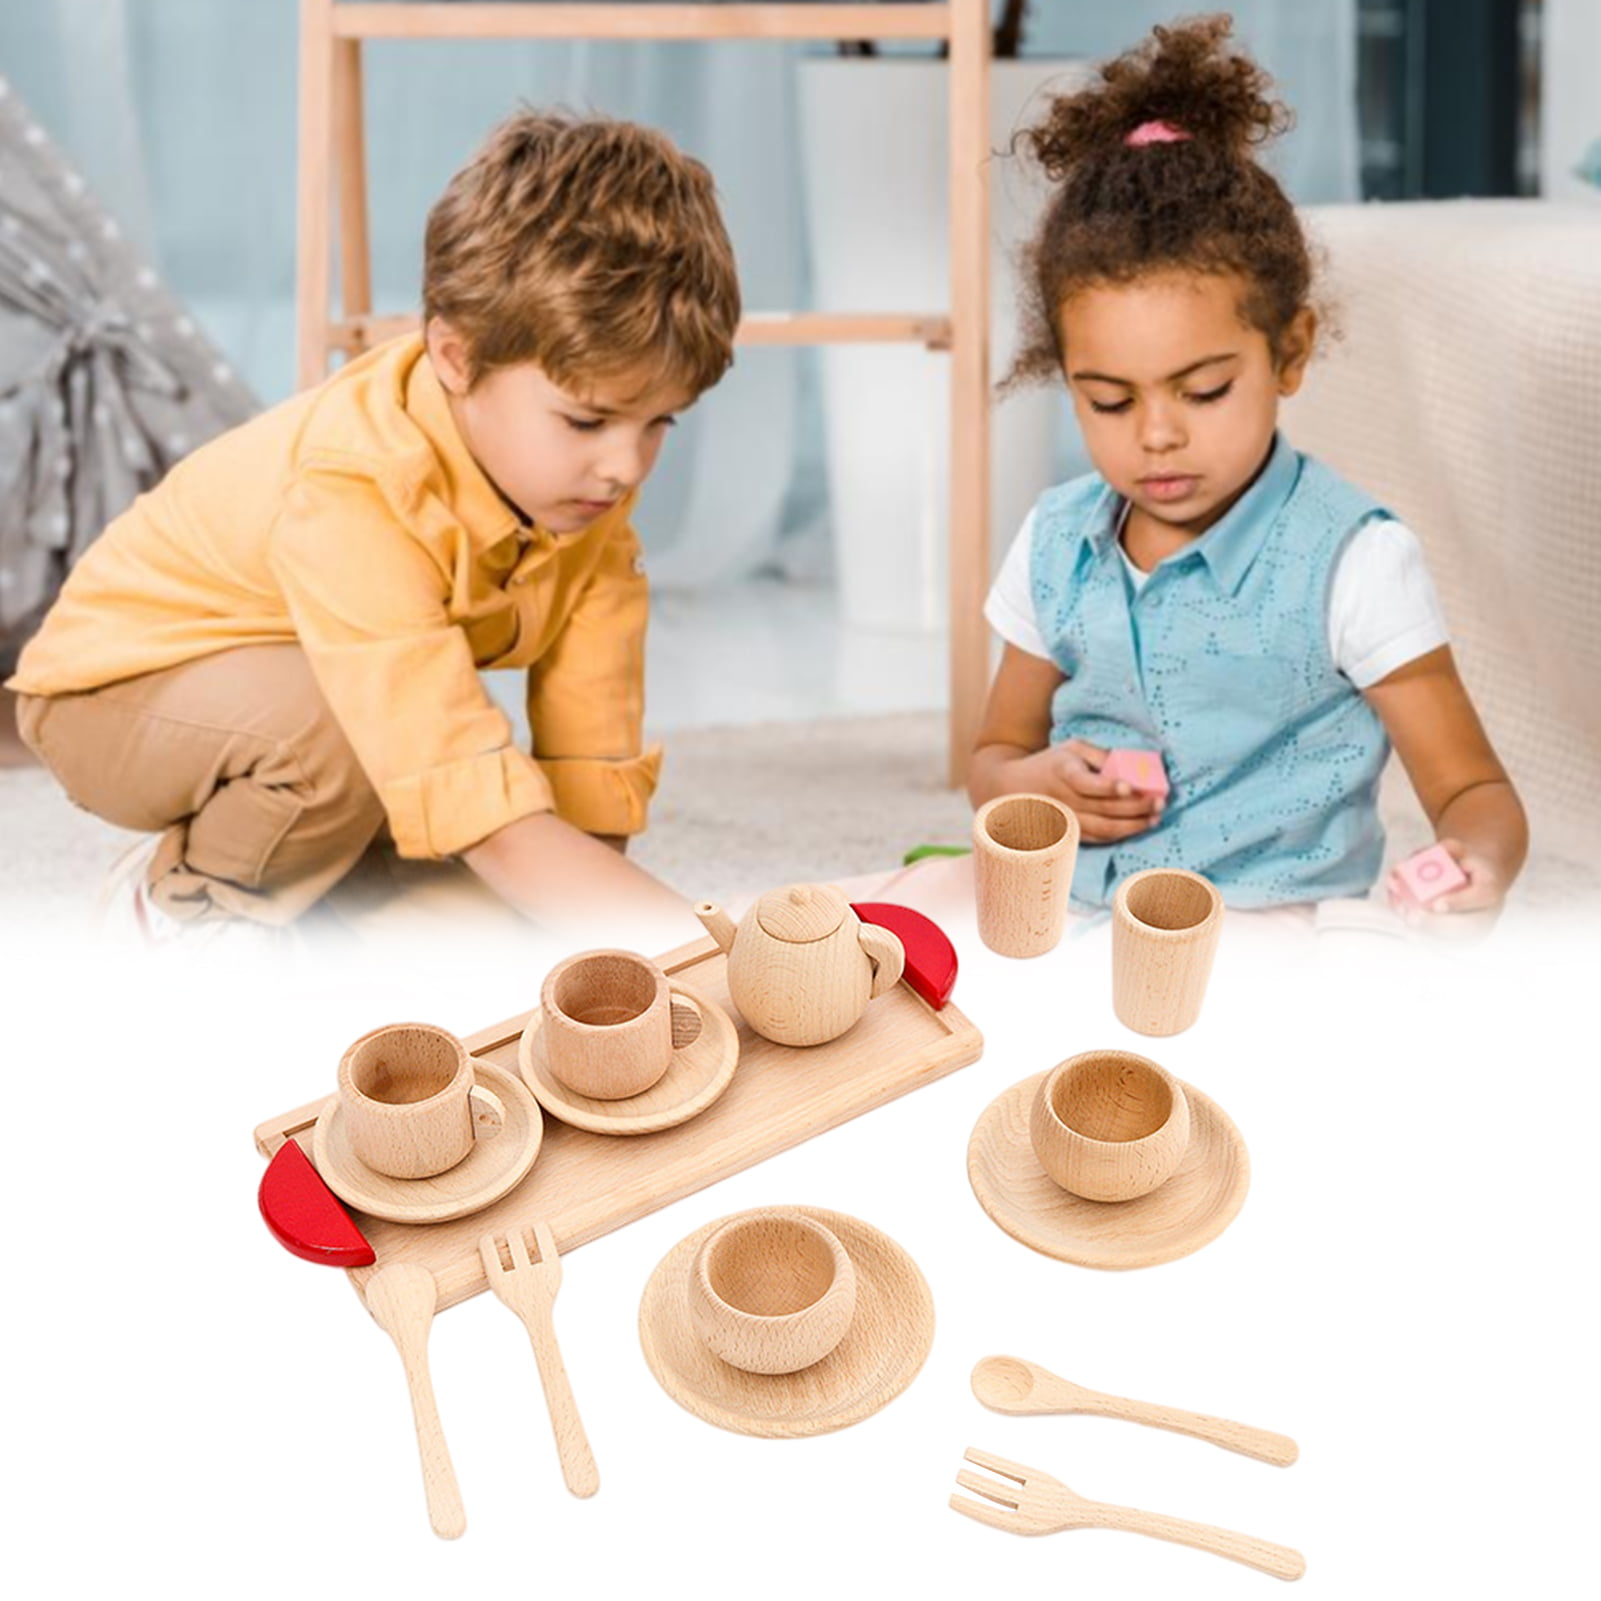 Kids Children Role Play Toy Birthday Gift 16pcs Natural Wooden Tea Set 